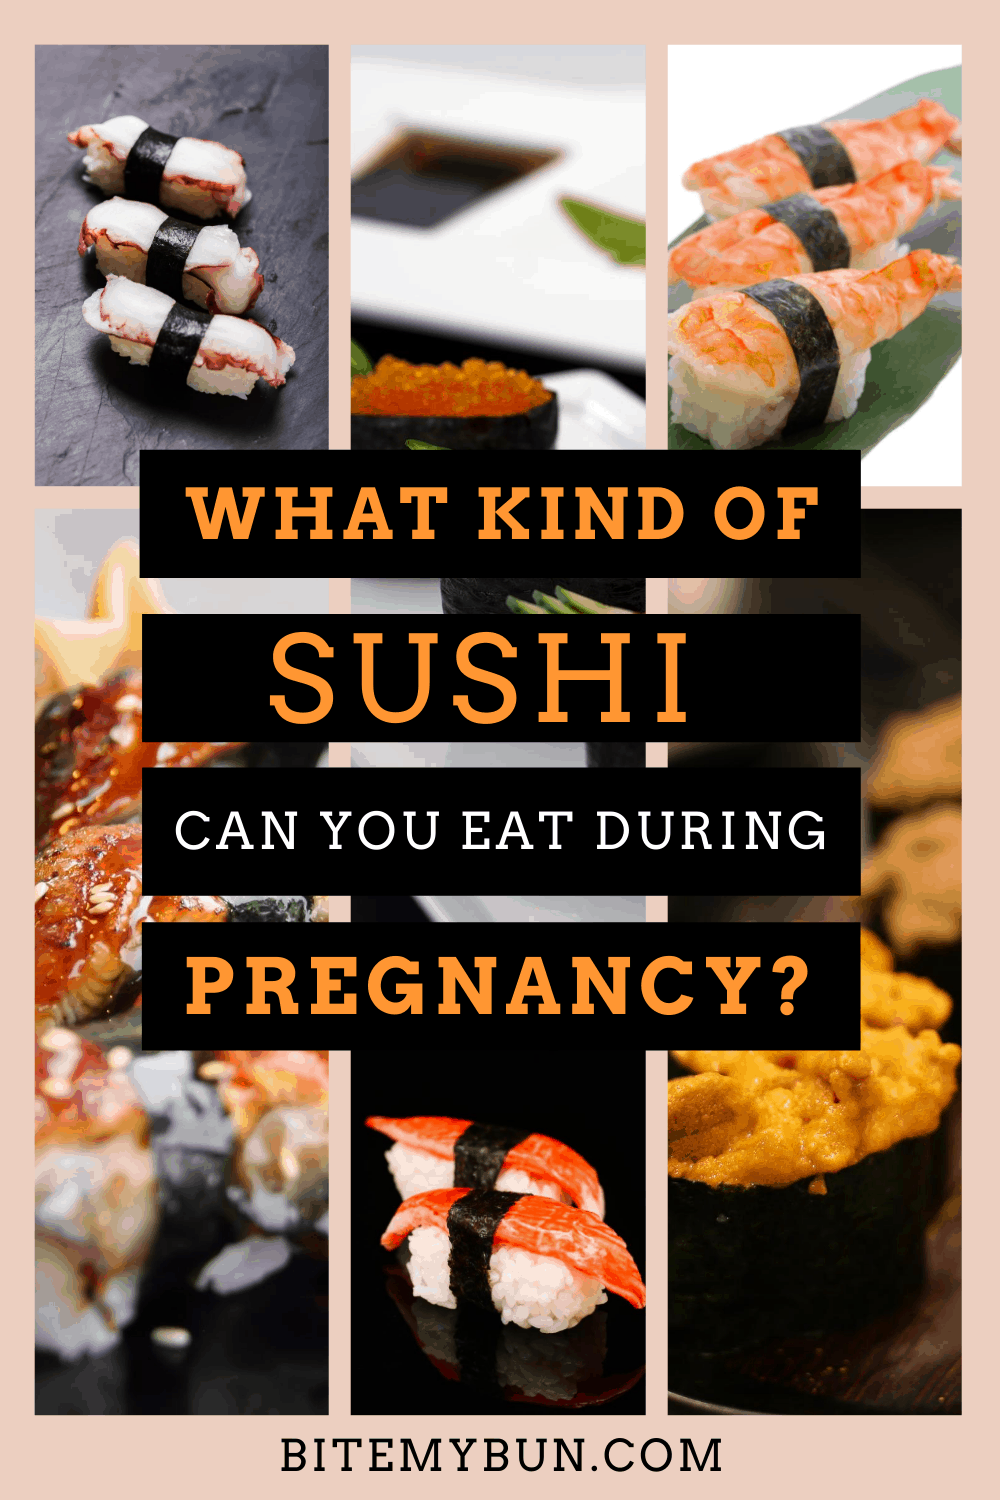 What kind of sushi can you eat of your pregnant